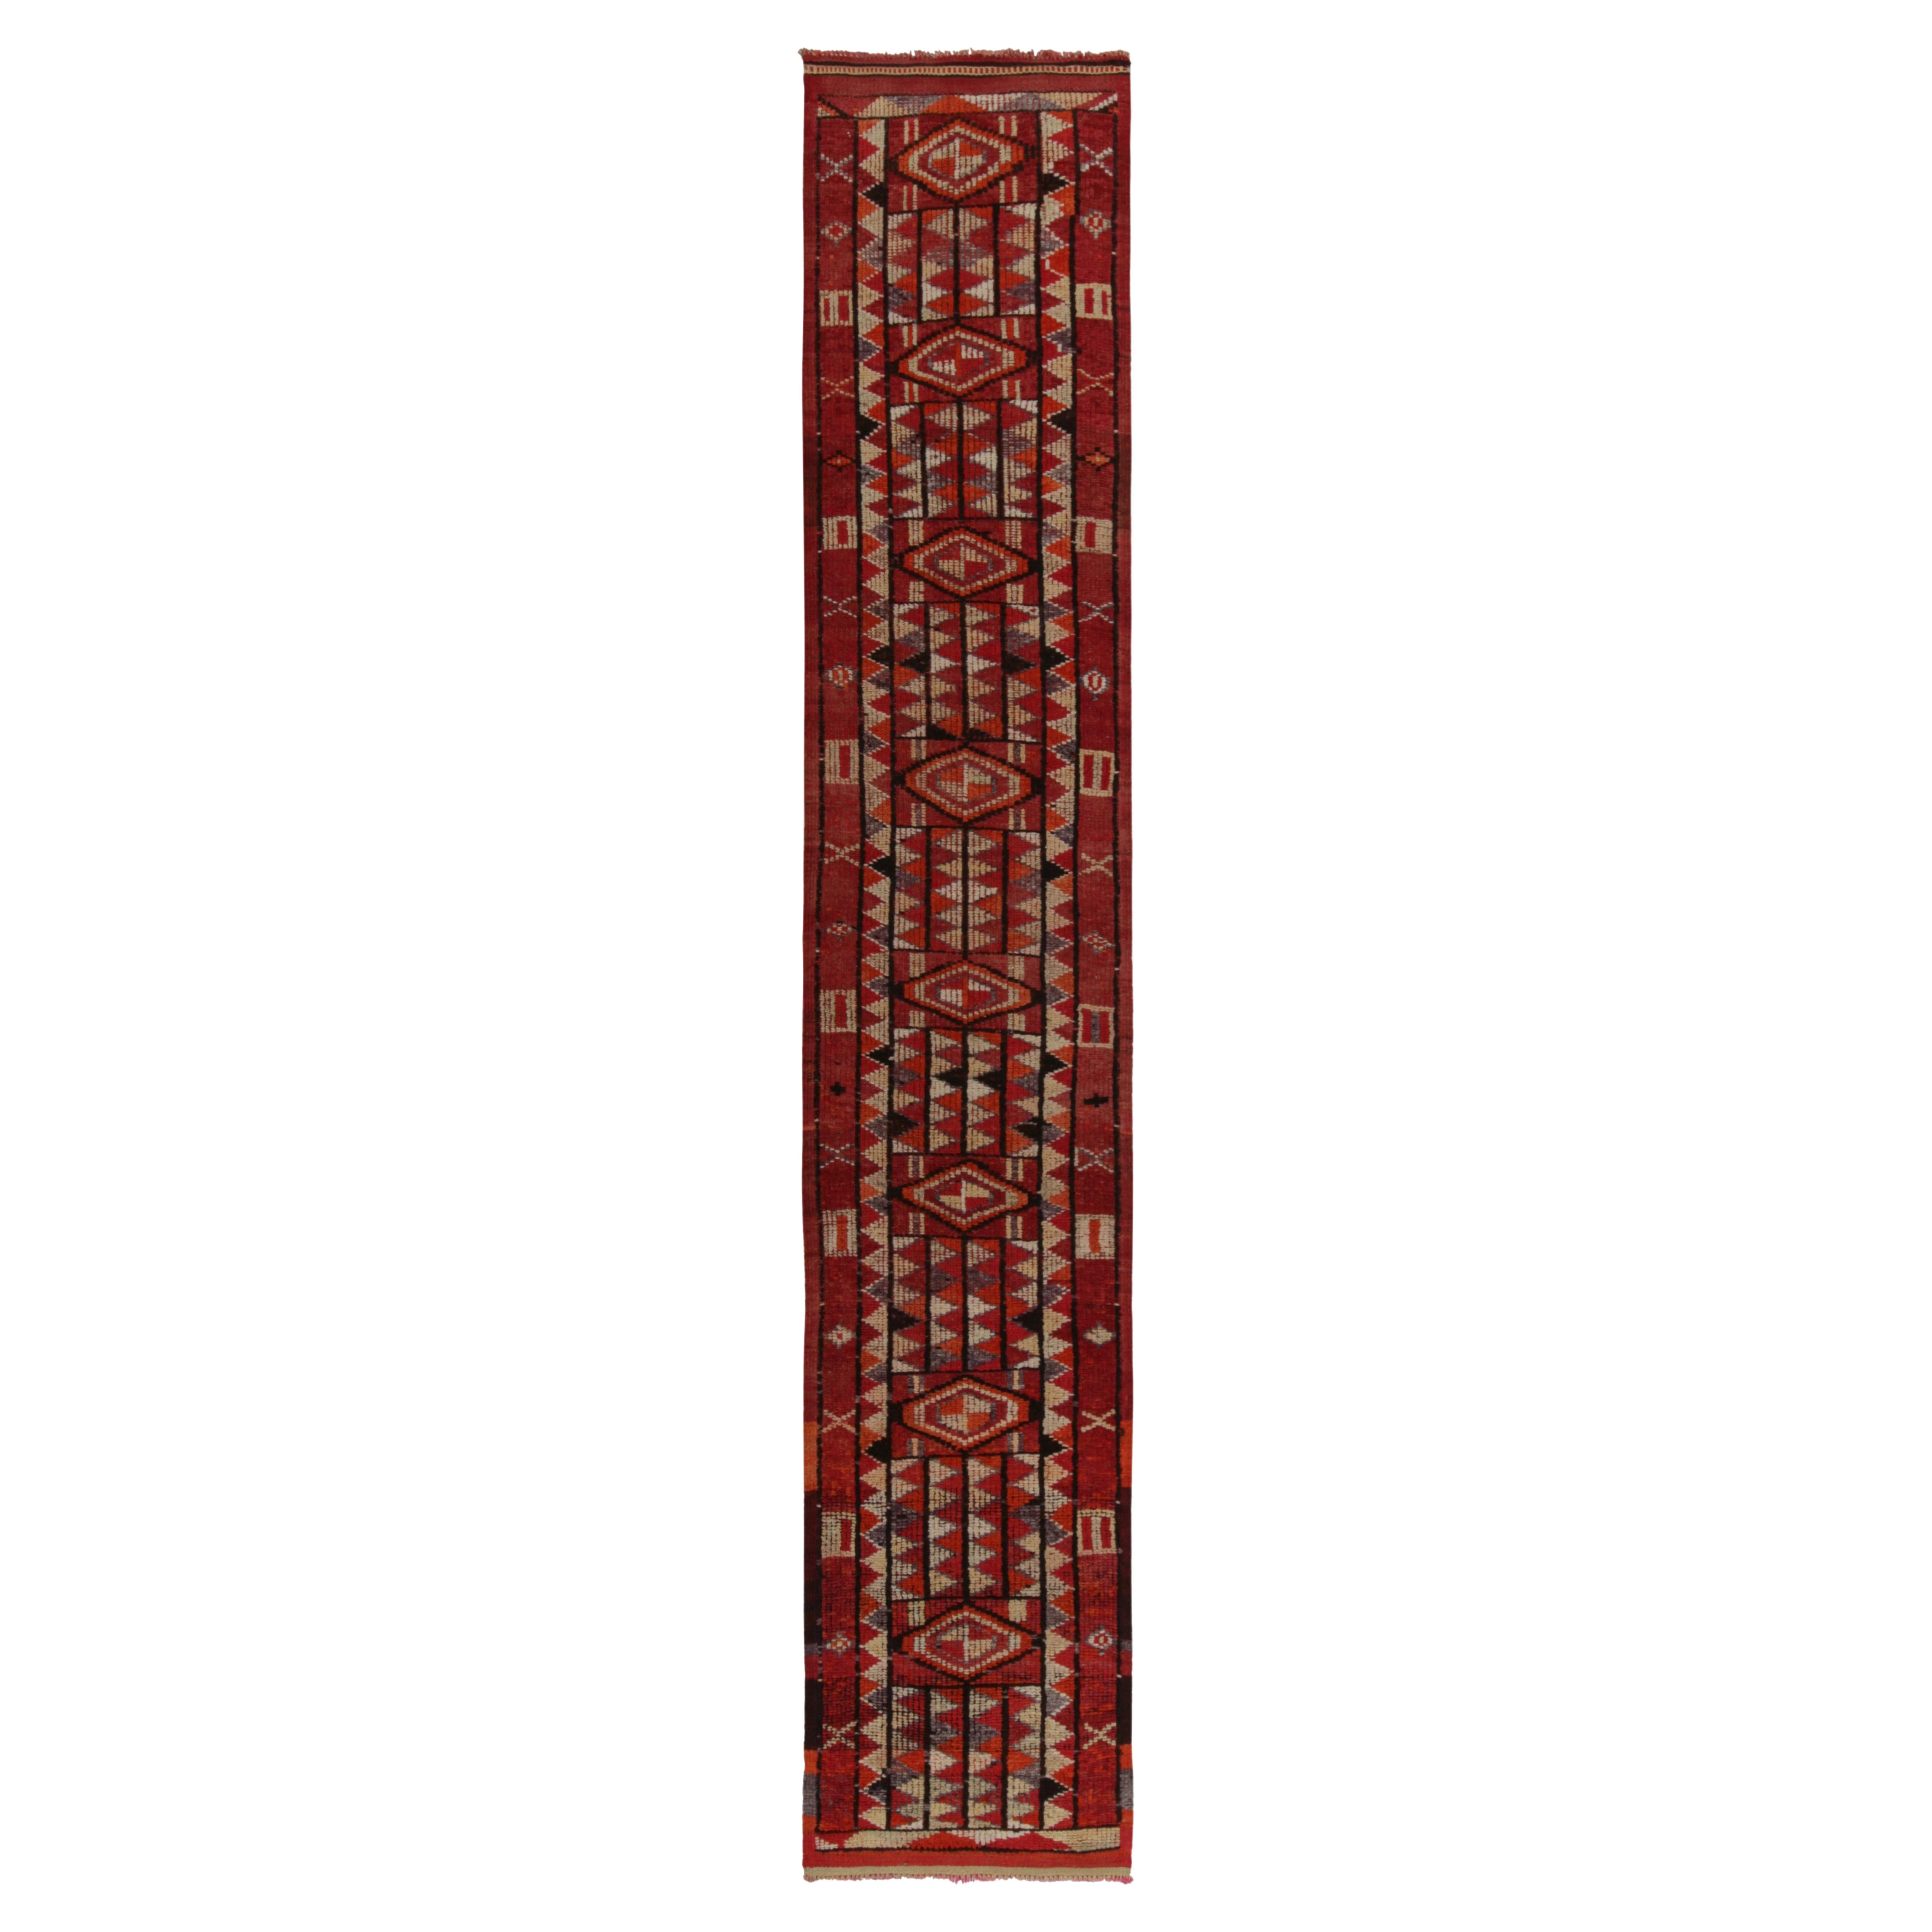 Vintage Tribal Kilim Runner Red with Vibrant Geometric Patterns by Rug & Kilim For Sale